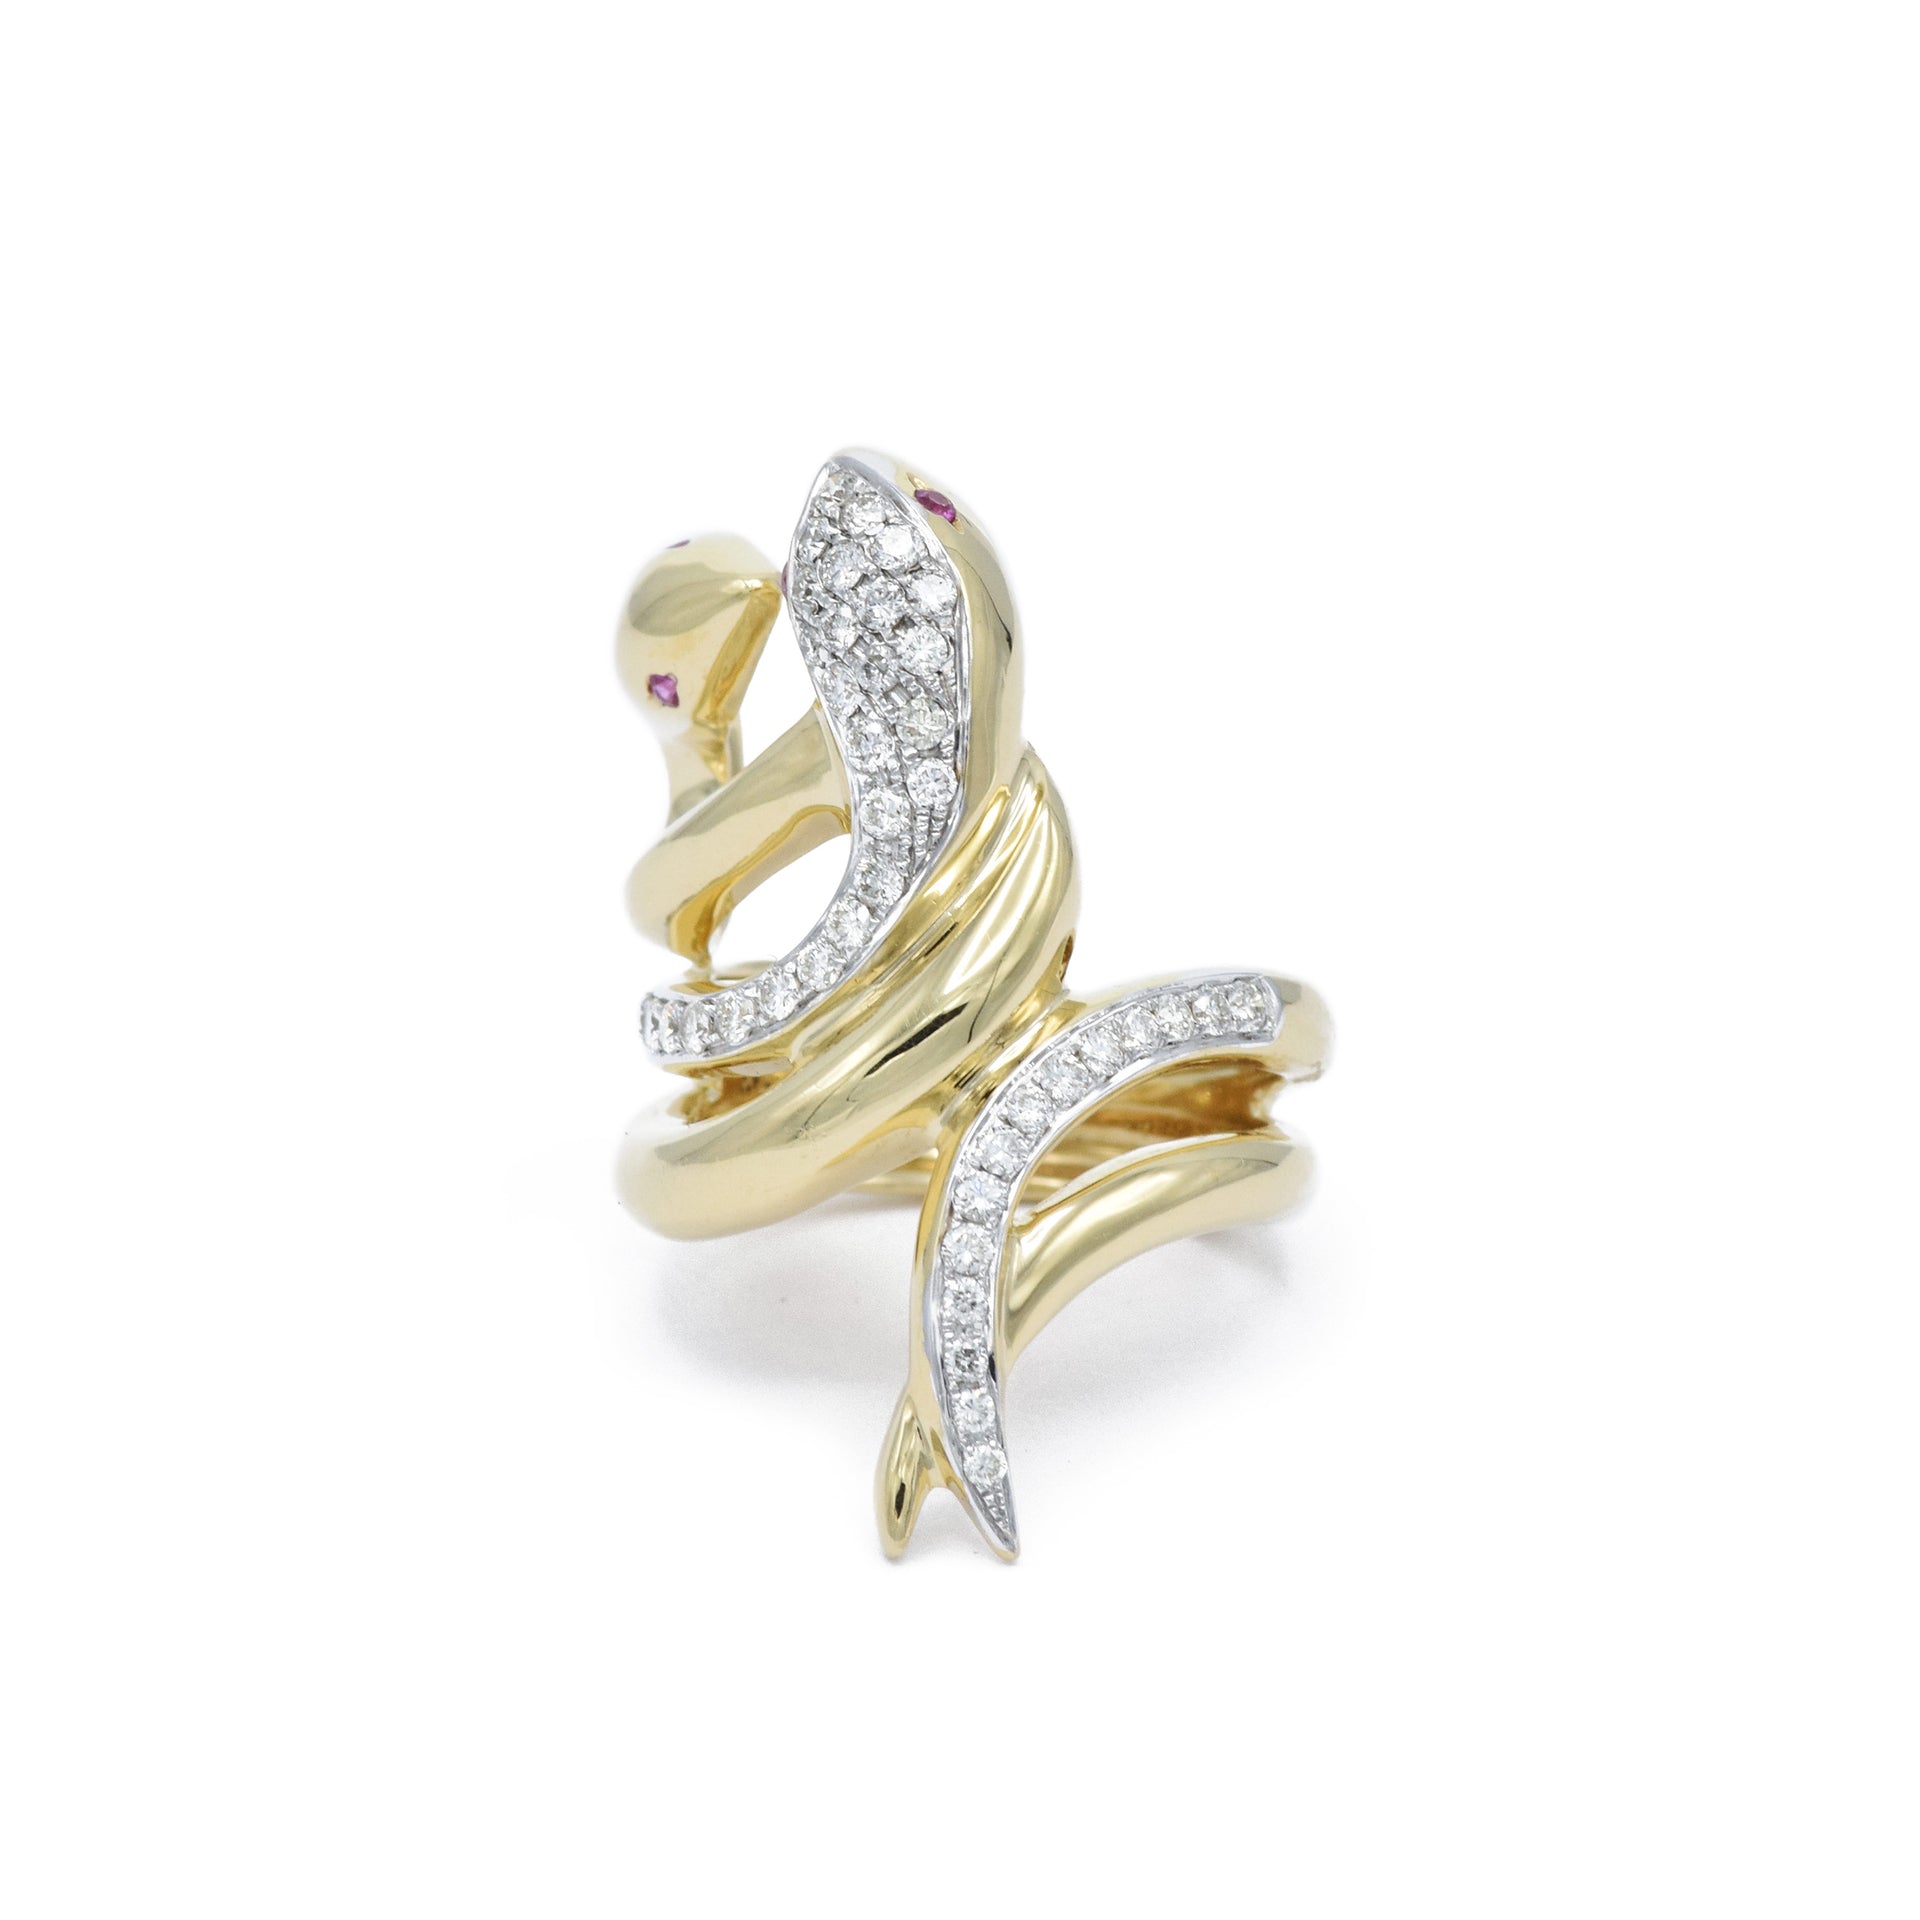 14KT Gold And Diamond Double Snake Ring